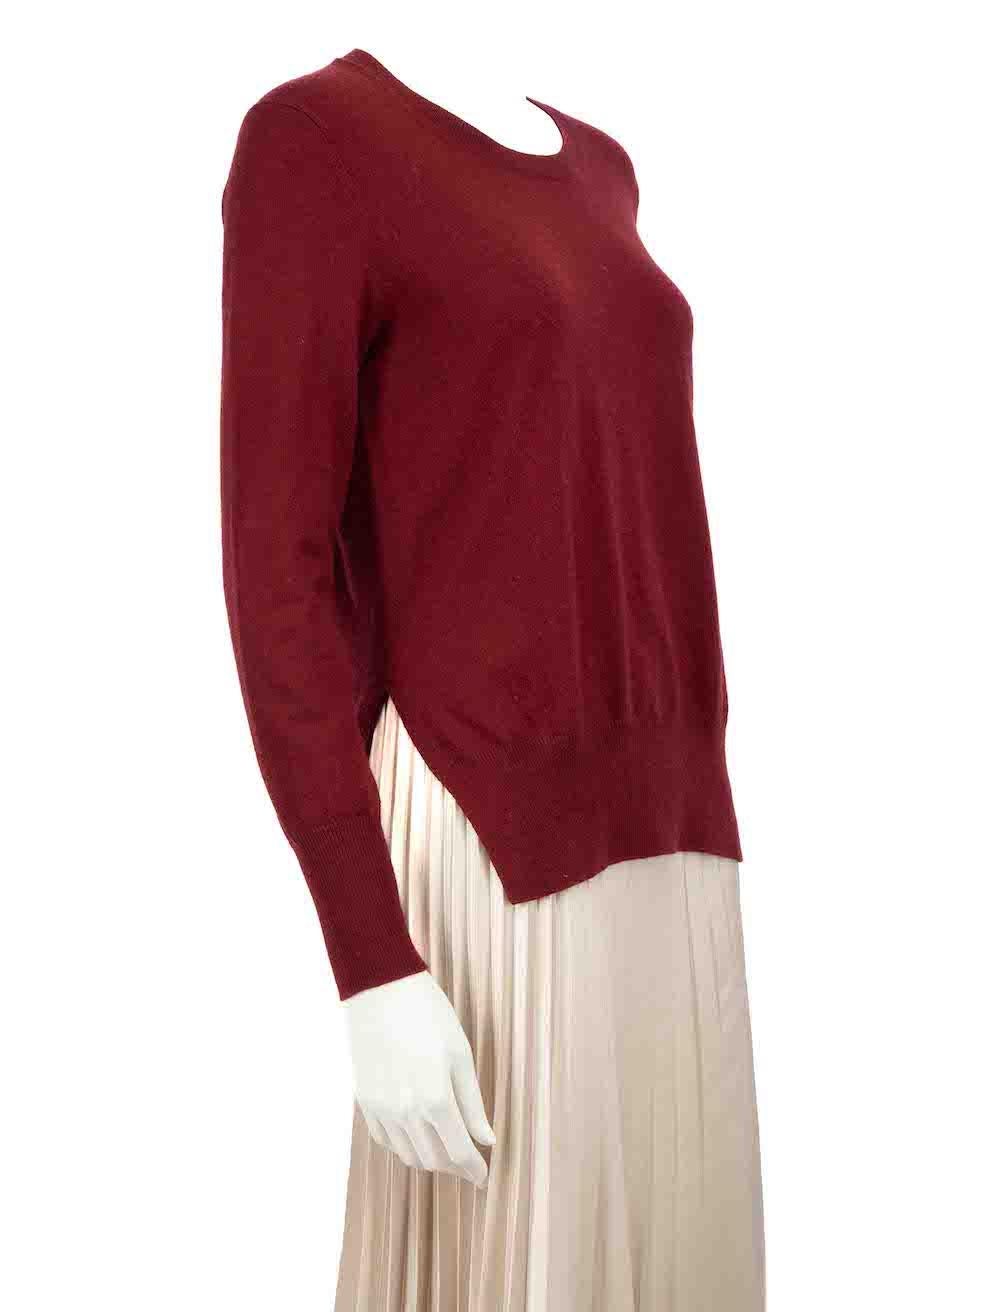 CONDITION is Very good. Minimal wear to jumper is evident. Minimal wear to the knitted surface with very light pilling found throughout on this used Isabel Marant Etoile designer resale item.
 
 
 
 Details
 
 
 Burgundy
 
 Cotton
 
 Long sleeves